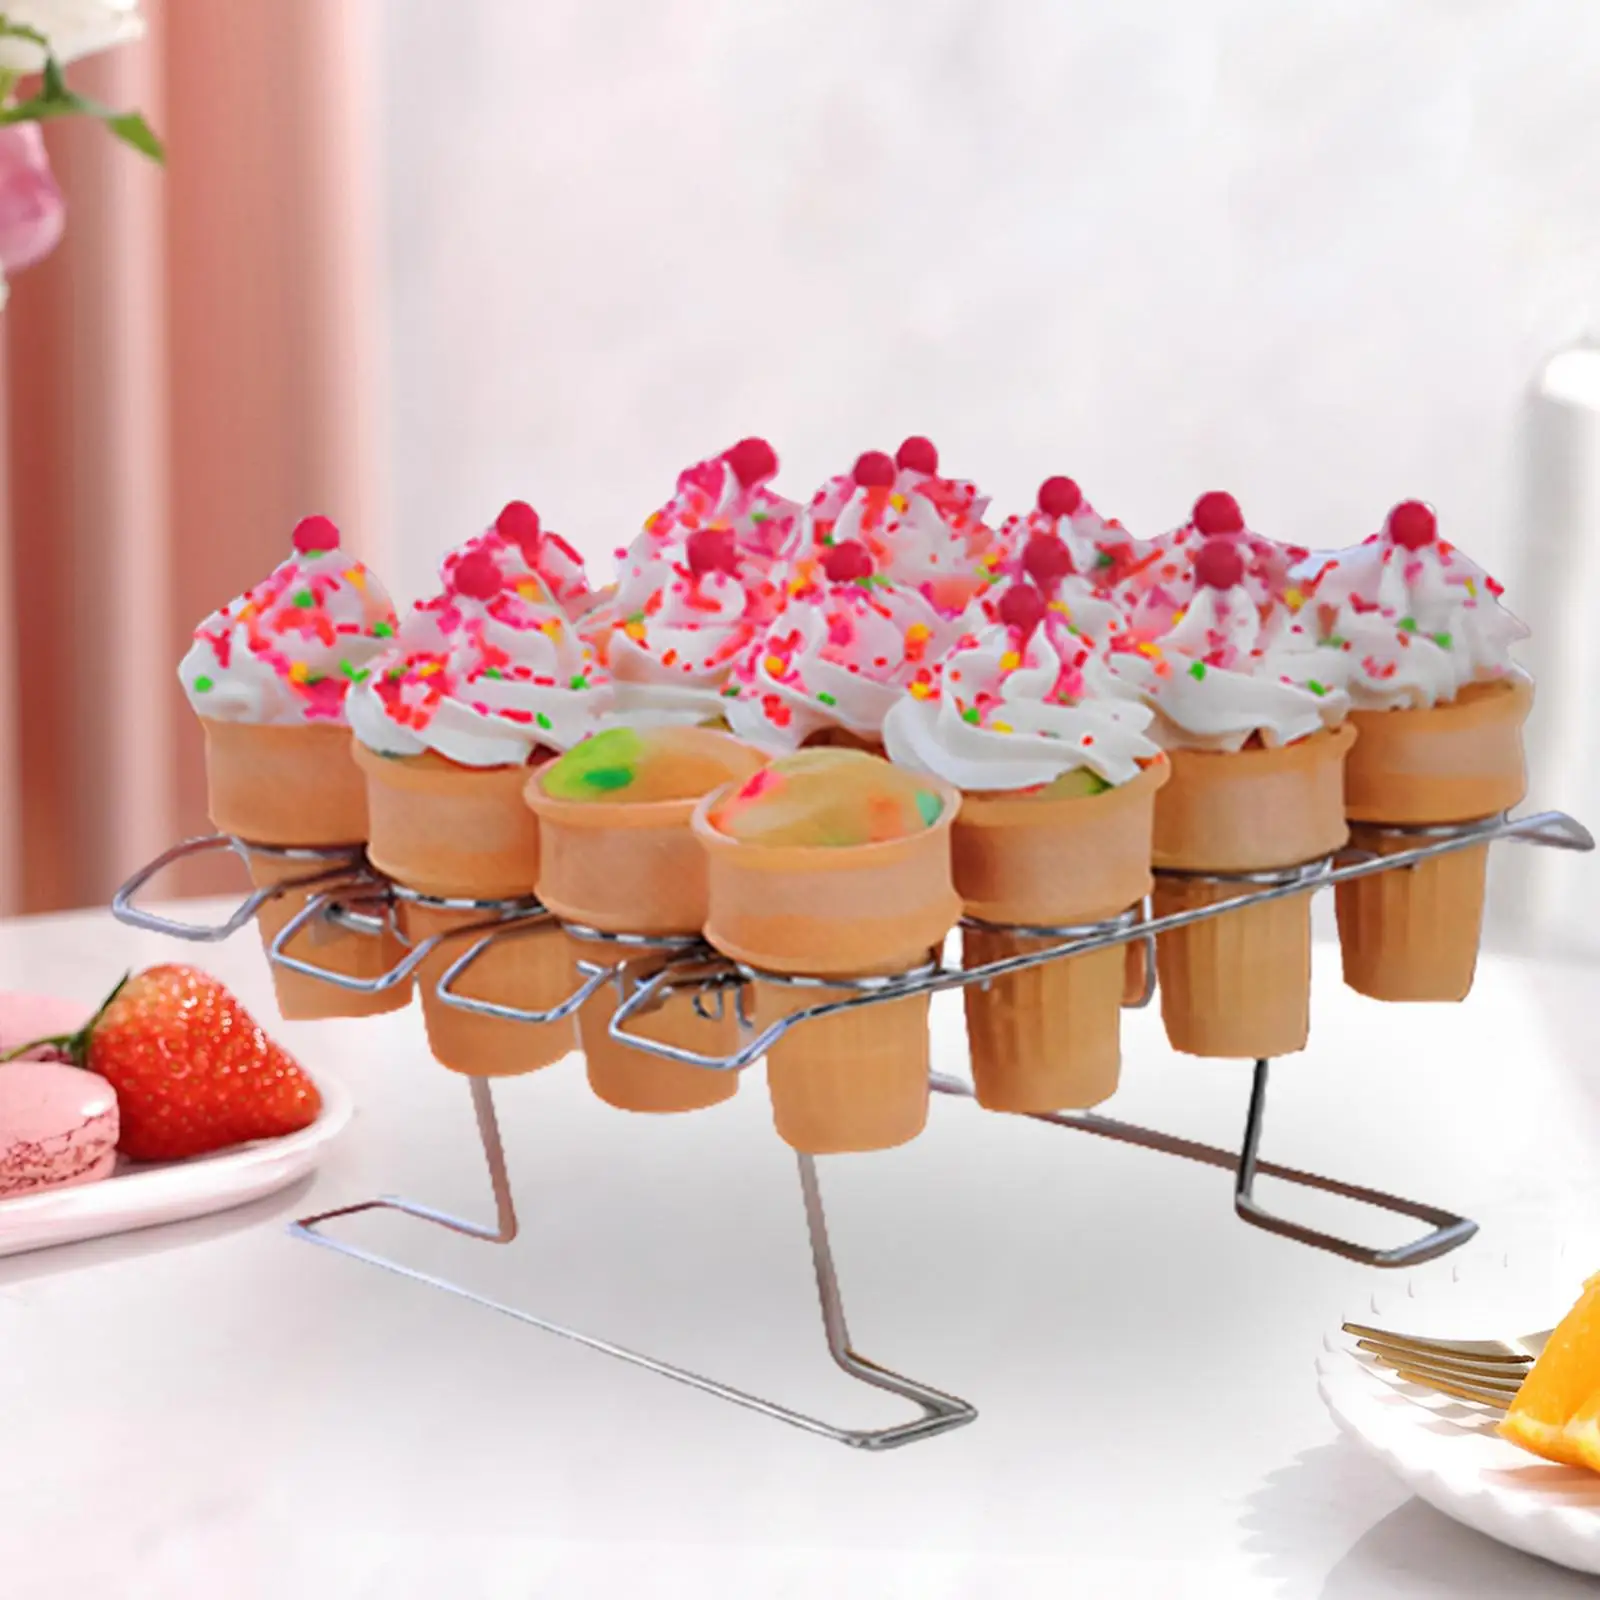 Ice Cream Cone Holder, 16slots Cone Cupcakes Storage Shelf, Cooking, Portable Cupcake Cone Display Stand for Retirement